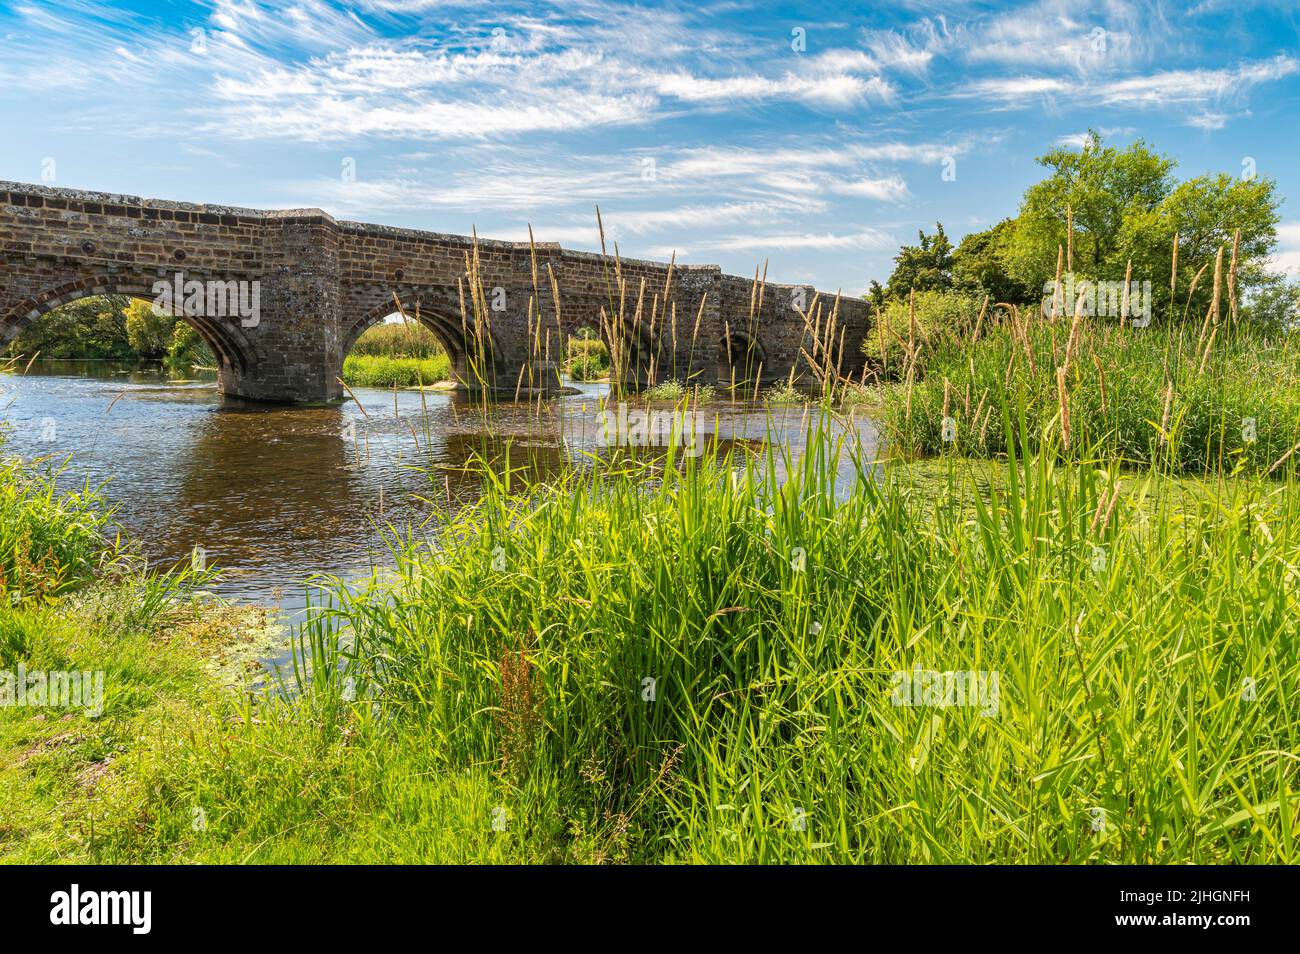 White Mill Bridge is a norman bridge made with red sandstone and white limestone crossing over the river stour with green algae on a sunny day. Stock Photo